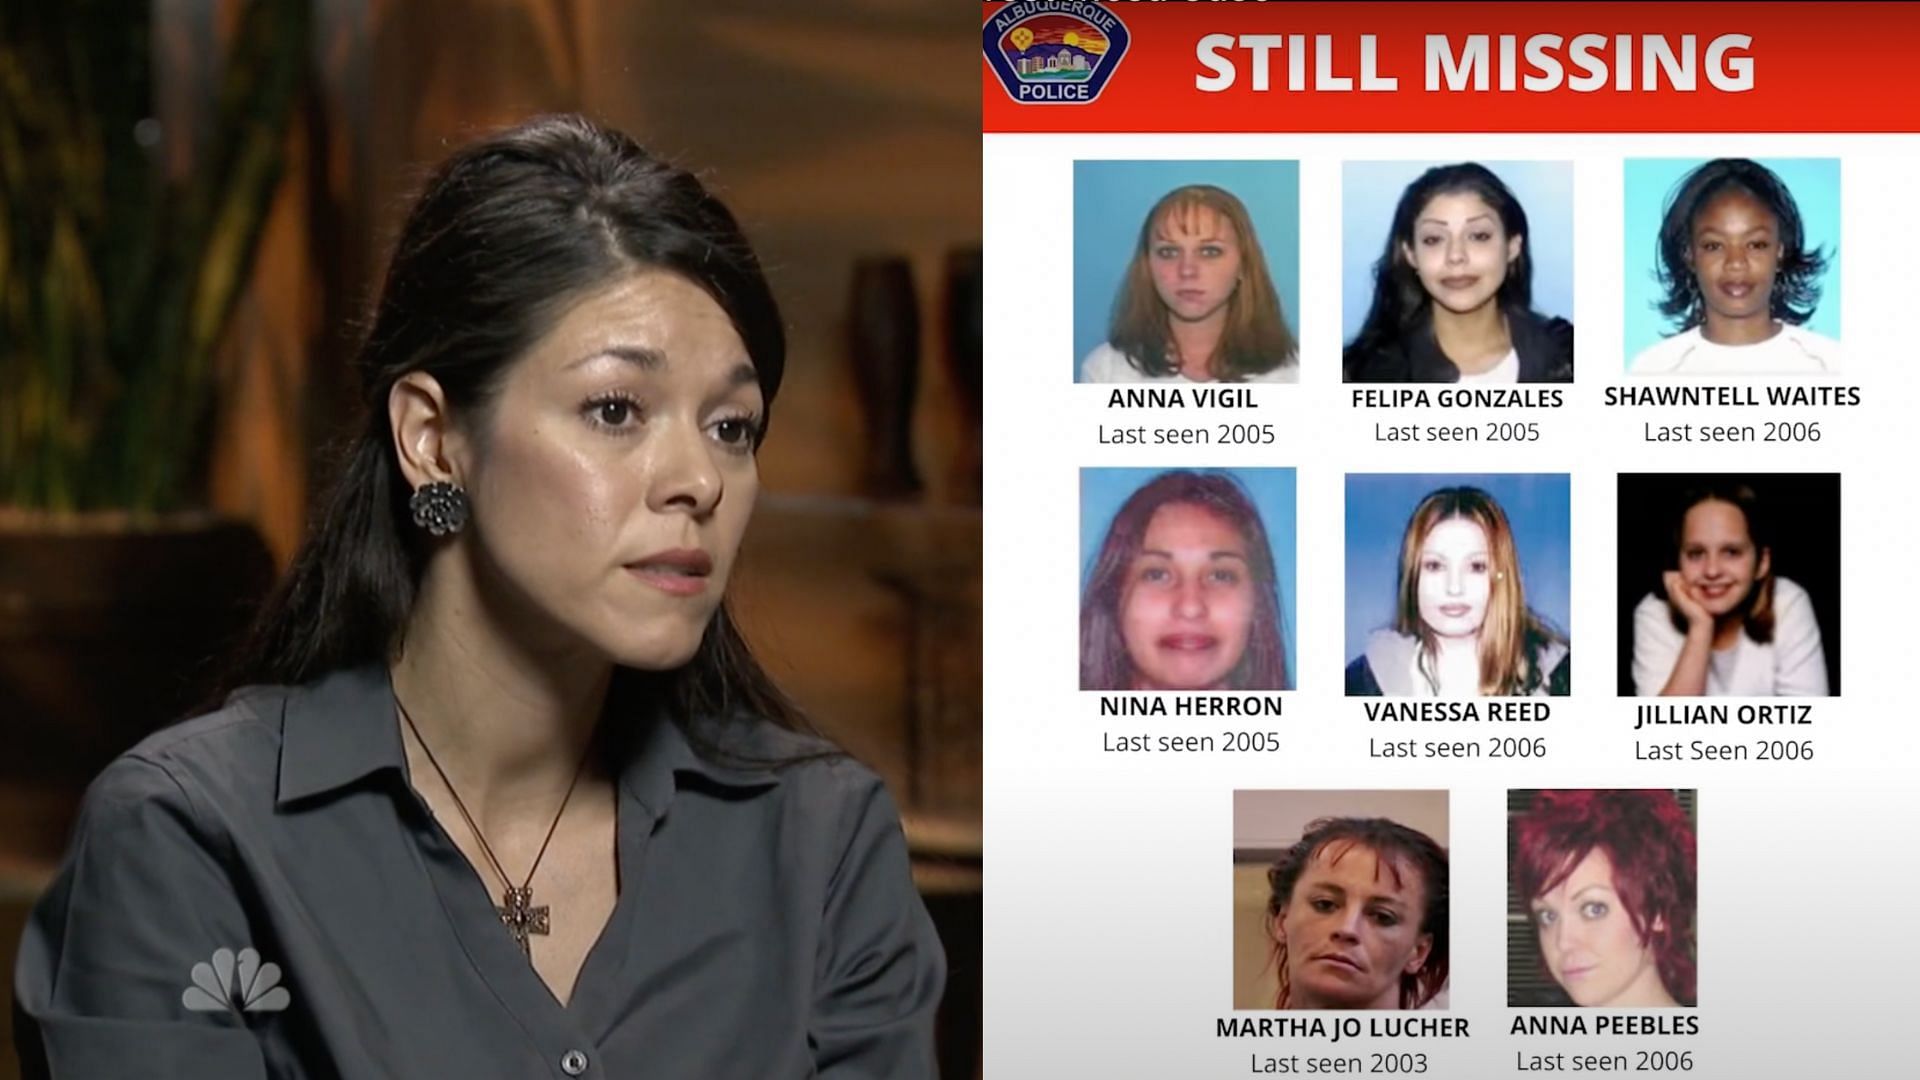 Albuquerque Police Department&#039;s former missing persons investigator Ida Lopez is now a contract investigator, still working on the decade-old case (Image via NBC, Albuquerque Police Department/YouTube)